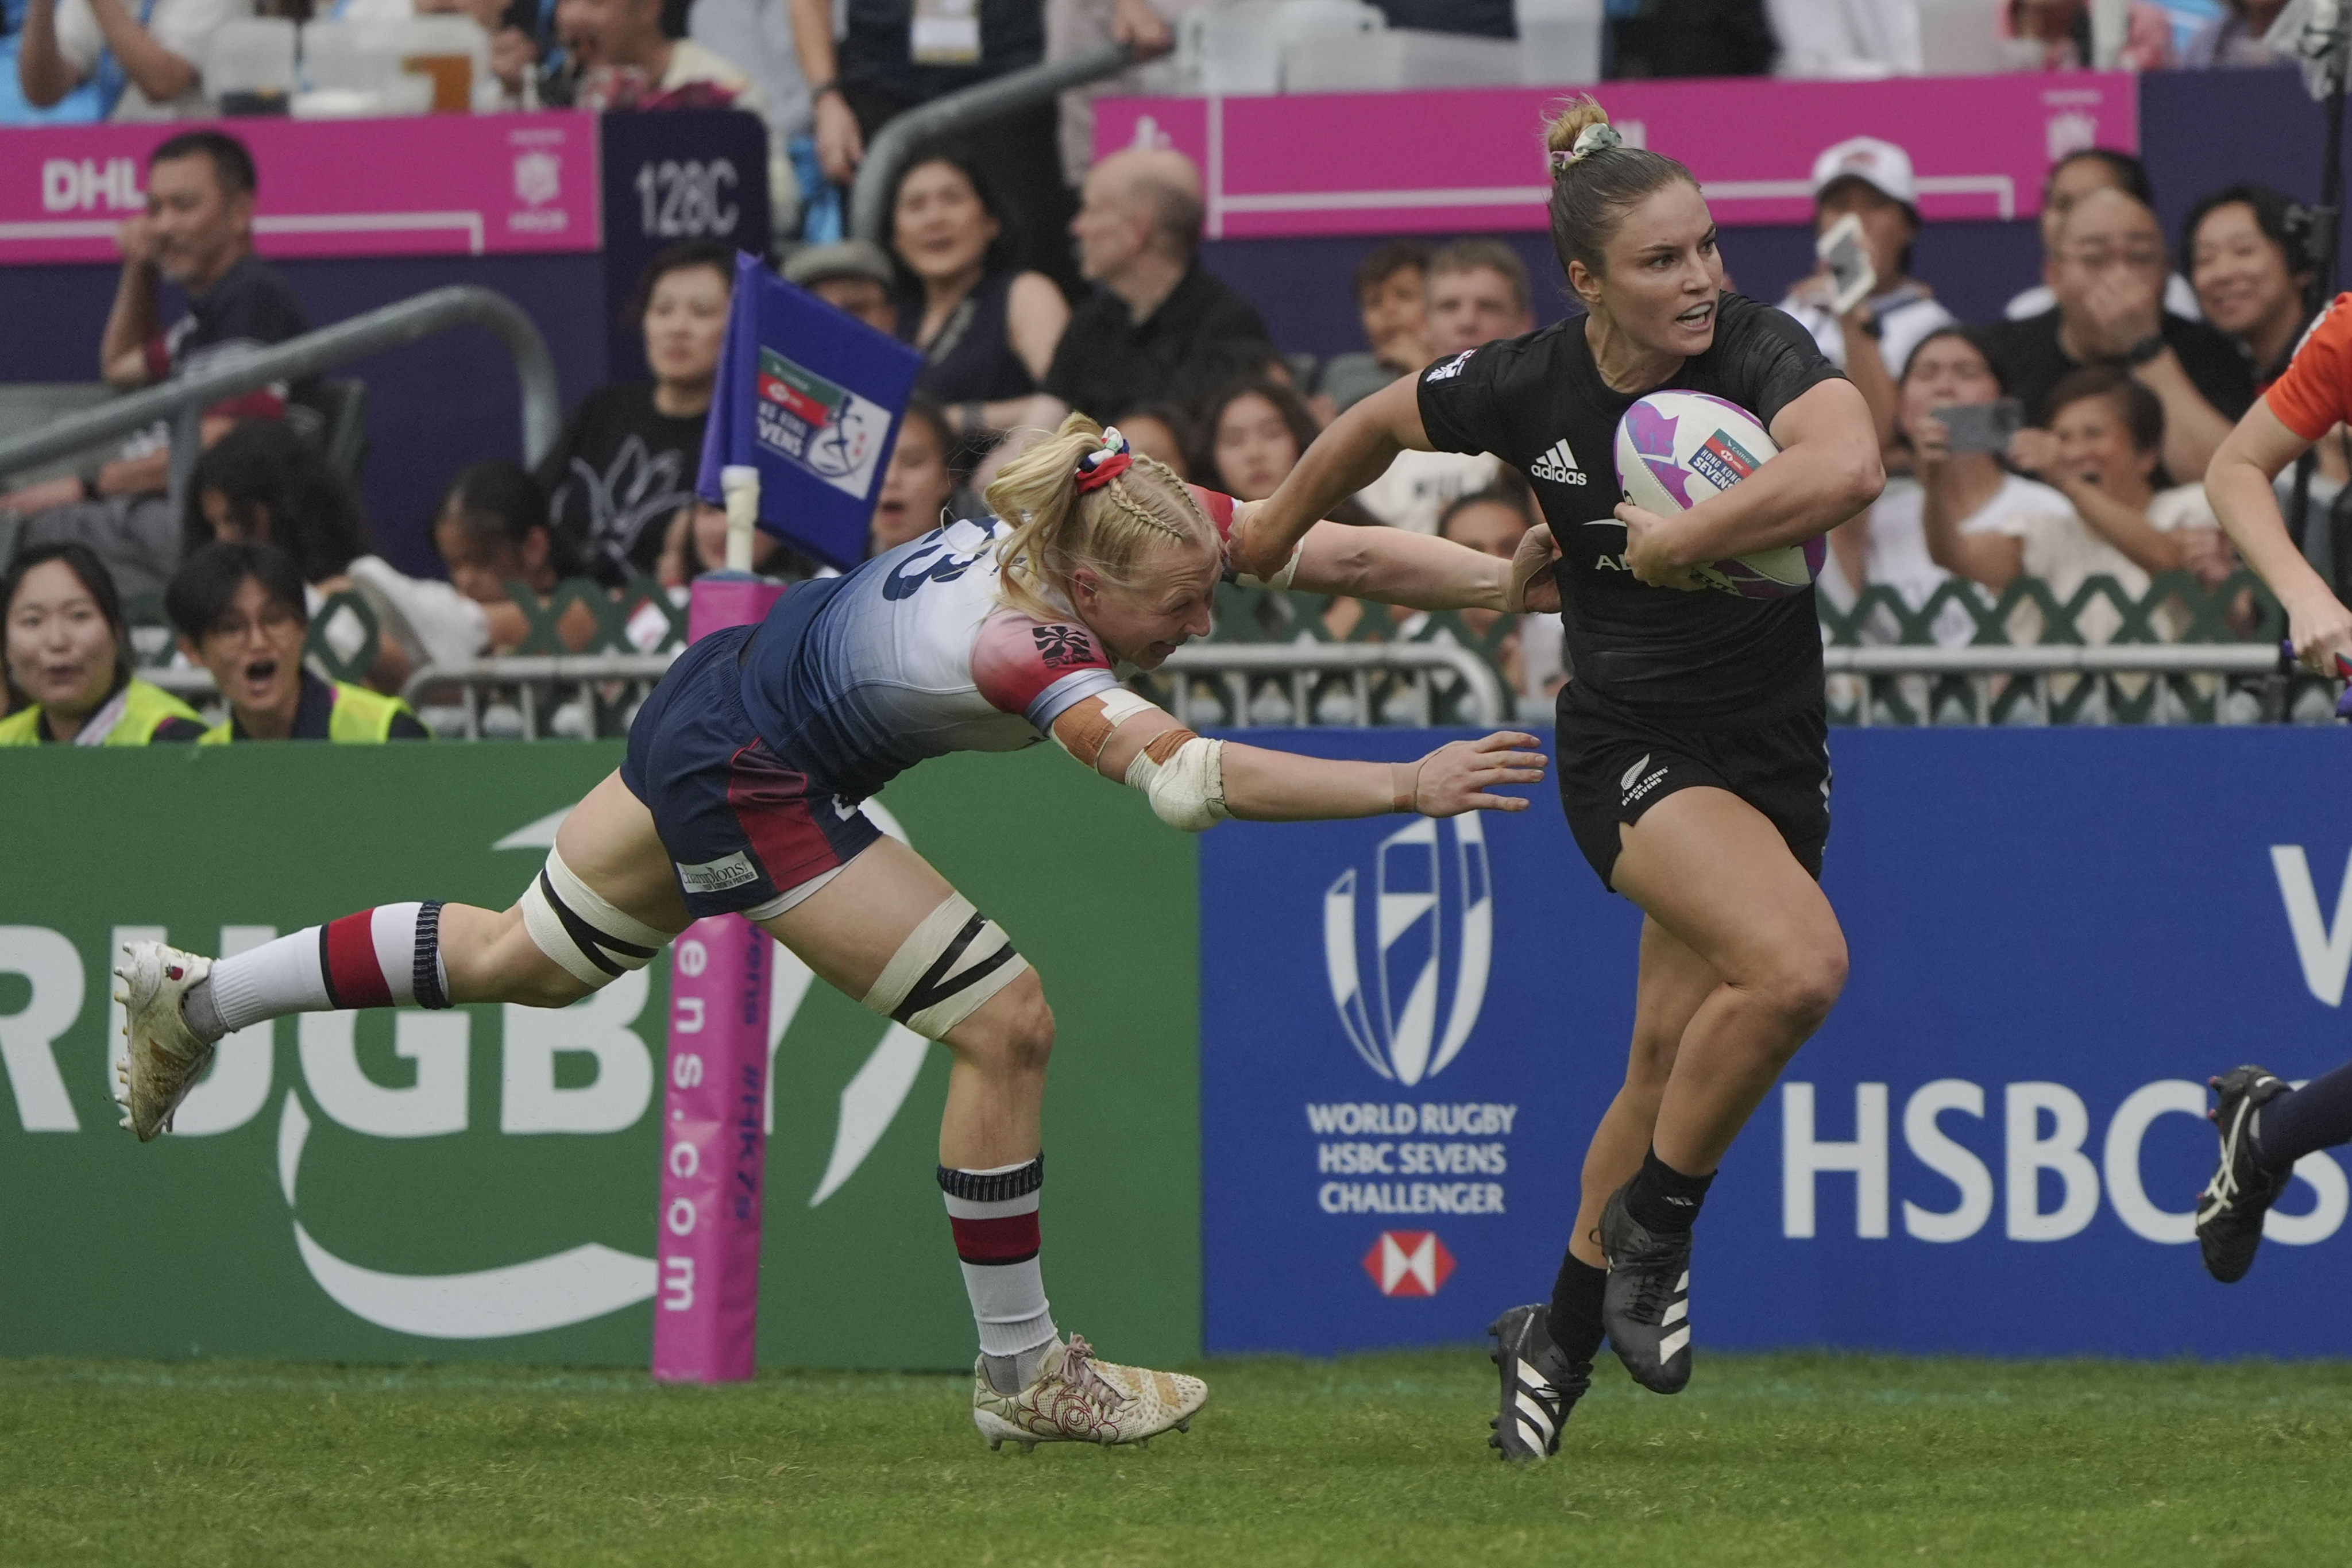 New Zealand’s Michaela Blyde (right) gets clear of Great Britain’s Heather Cowell at the Cathay/HSBC Hong Kong Sevens. Photo: Eugene Lee